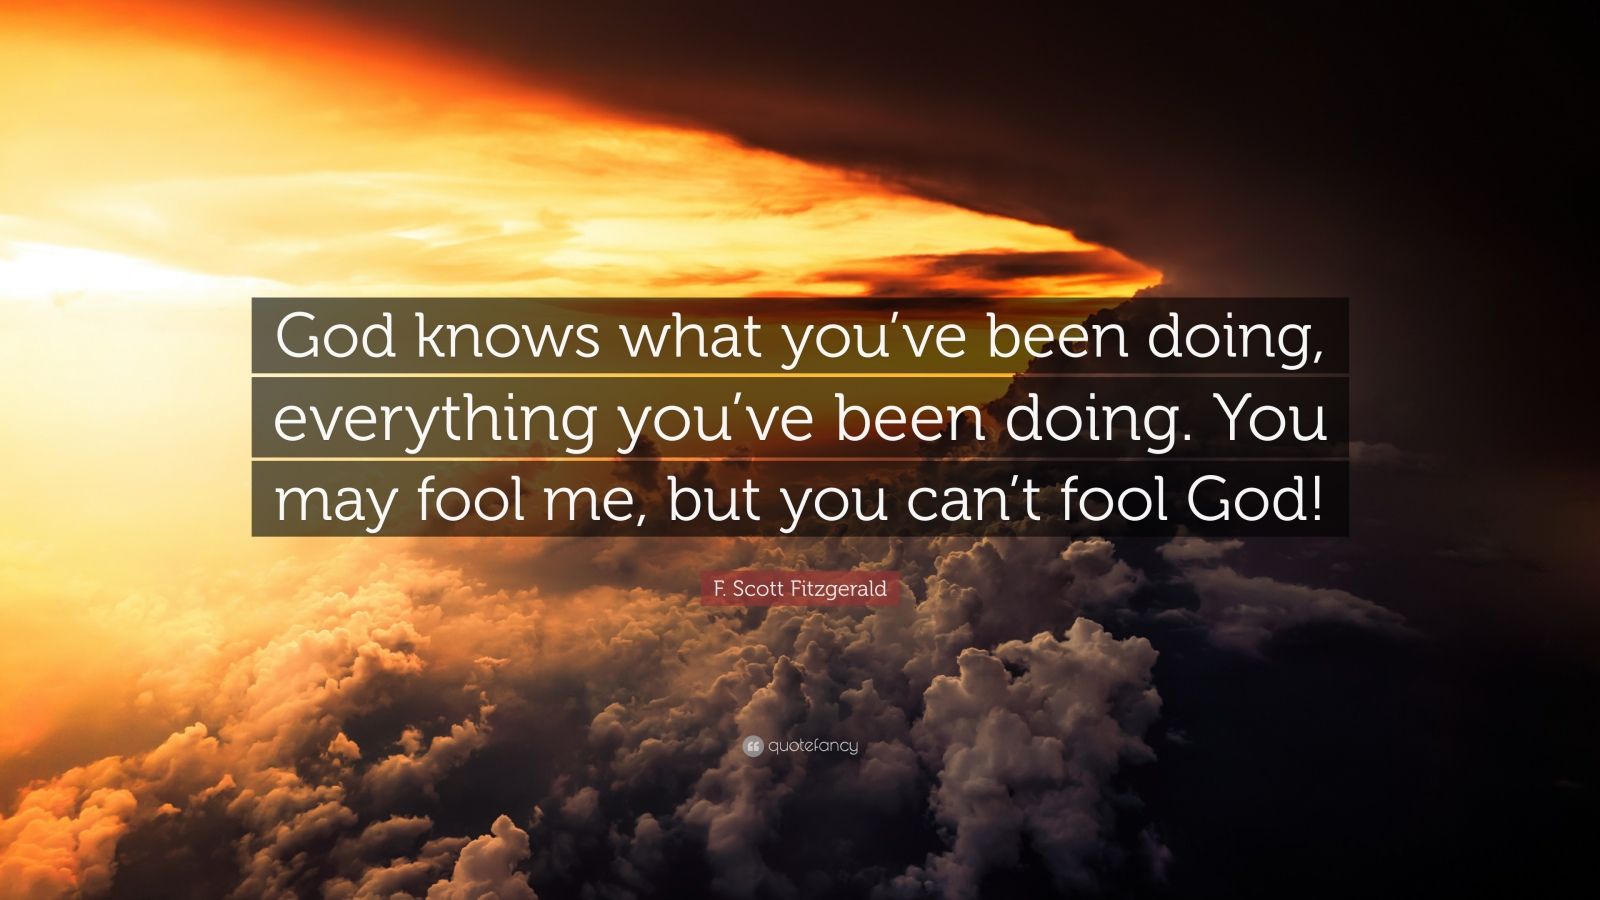 F. Scott Fitzgerald Quote: "God knows what you've been ...